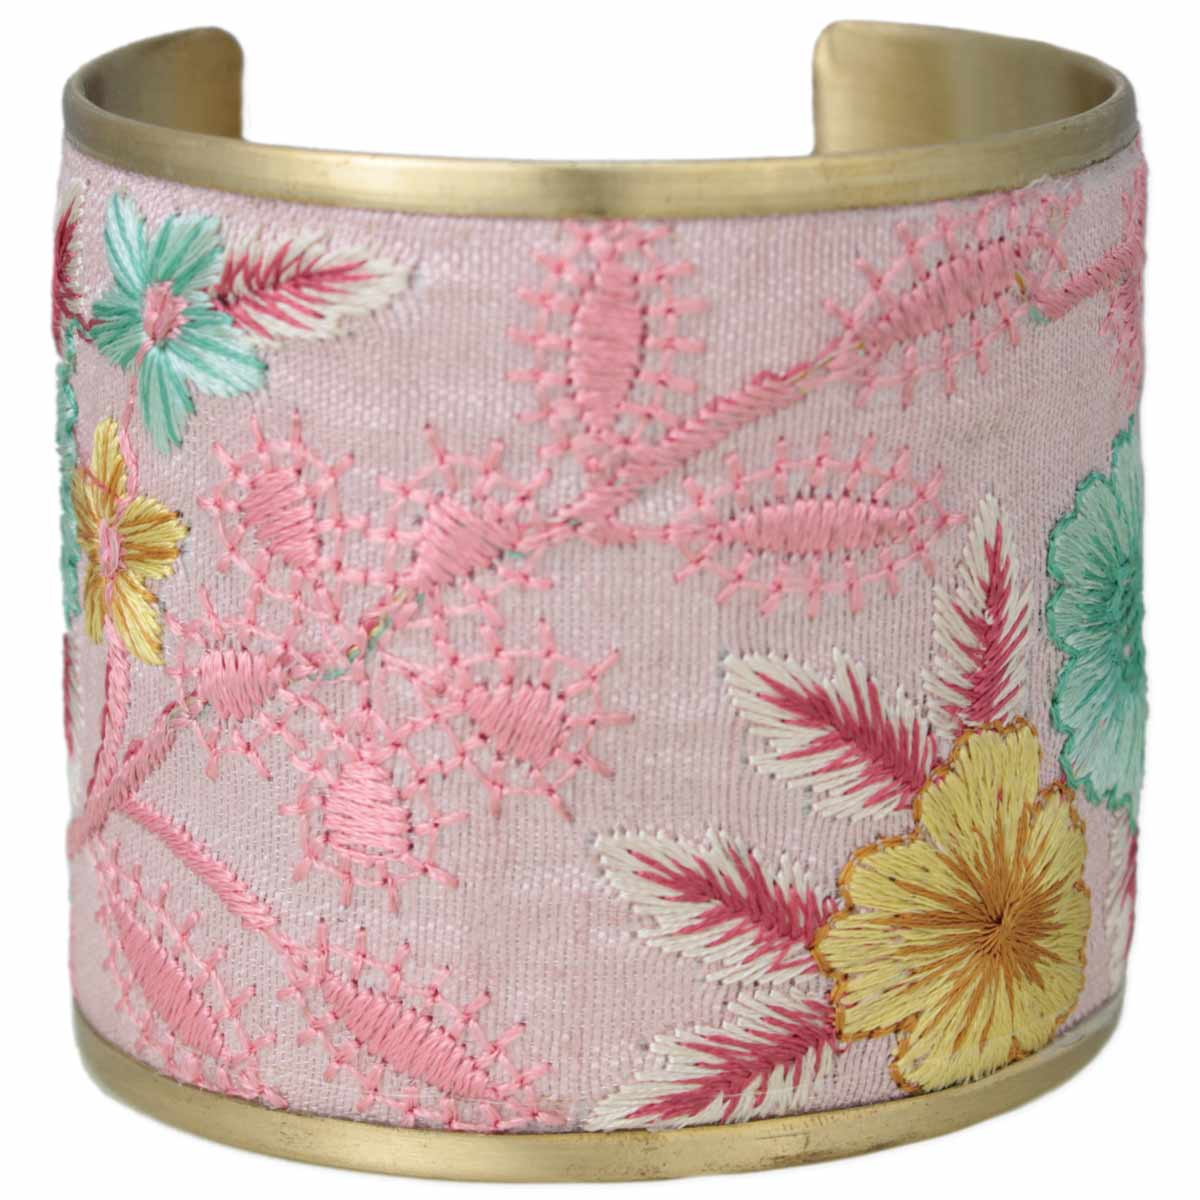 Pastel Embroidered Cuff Bracelet (Large)